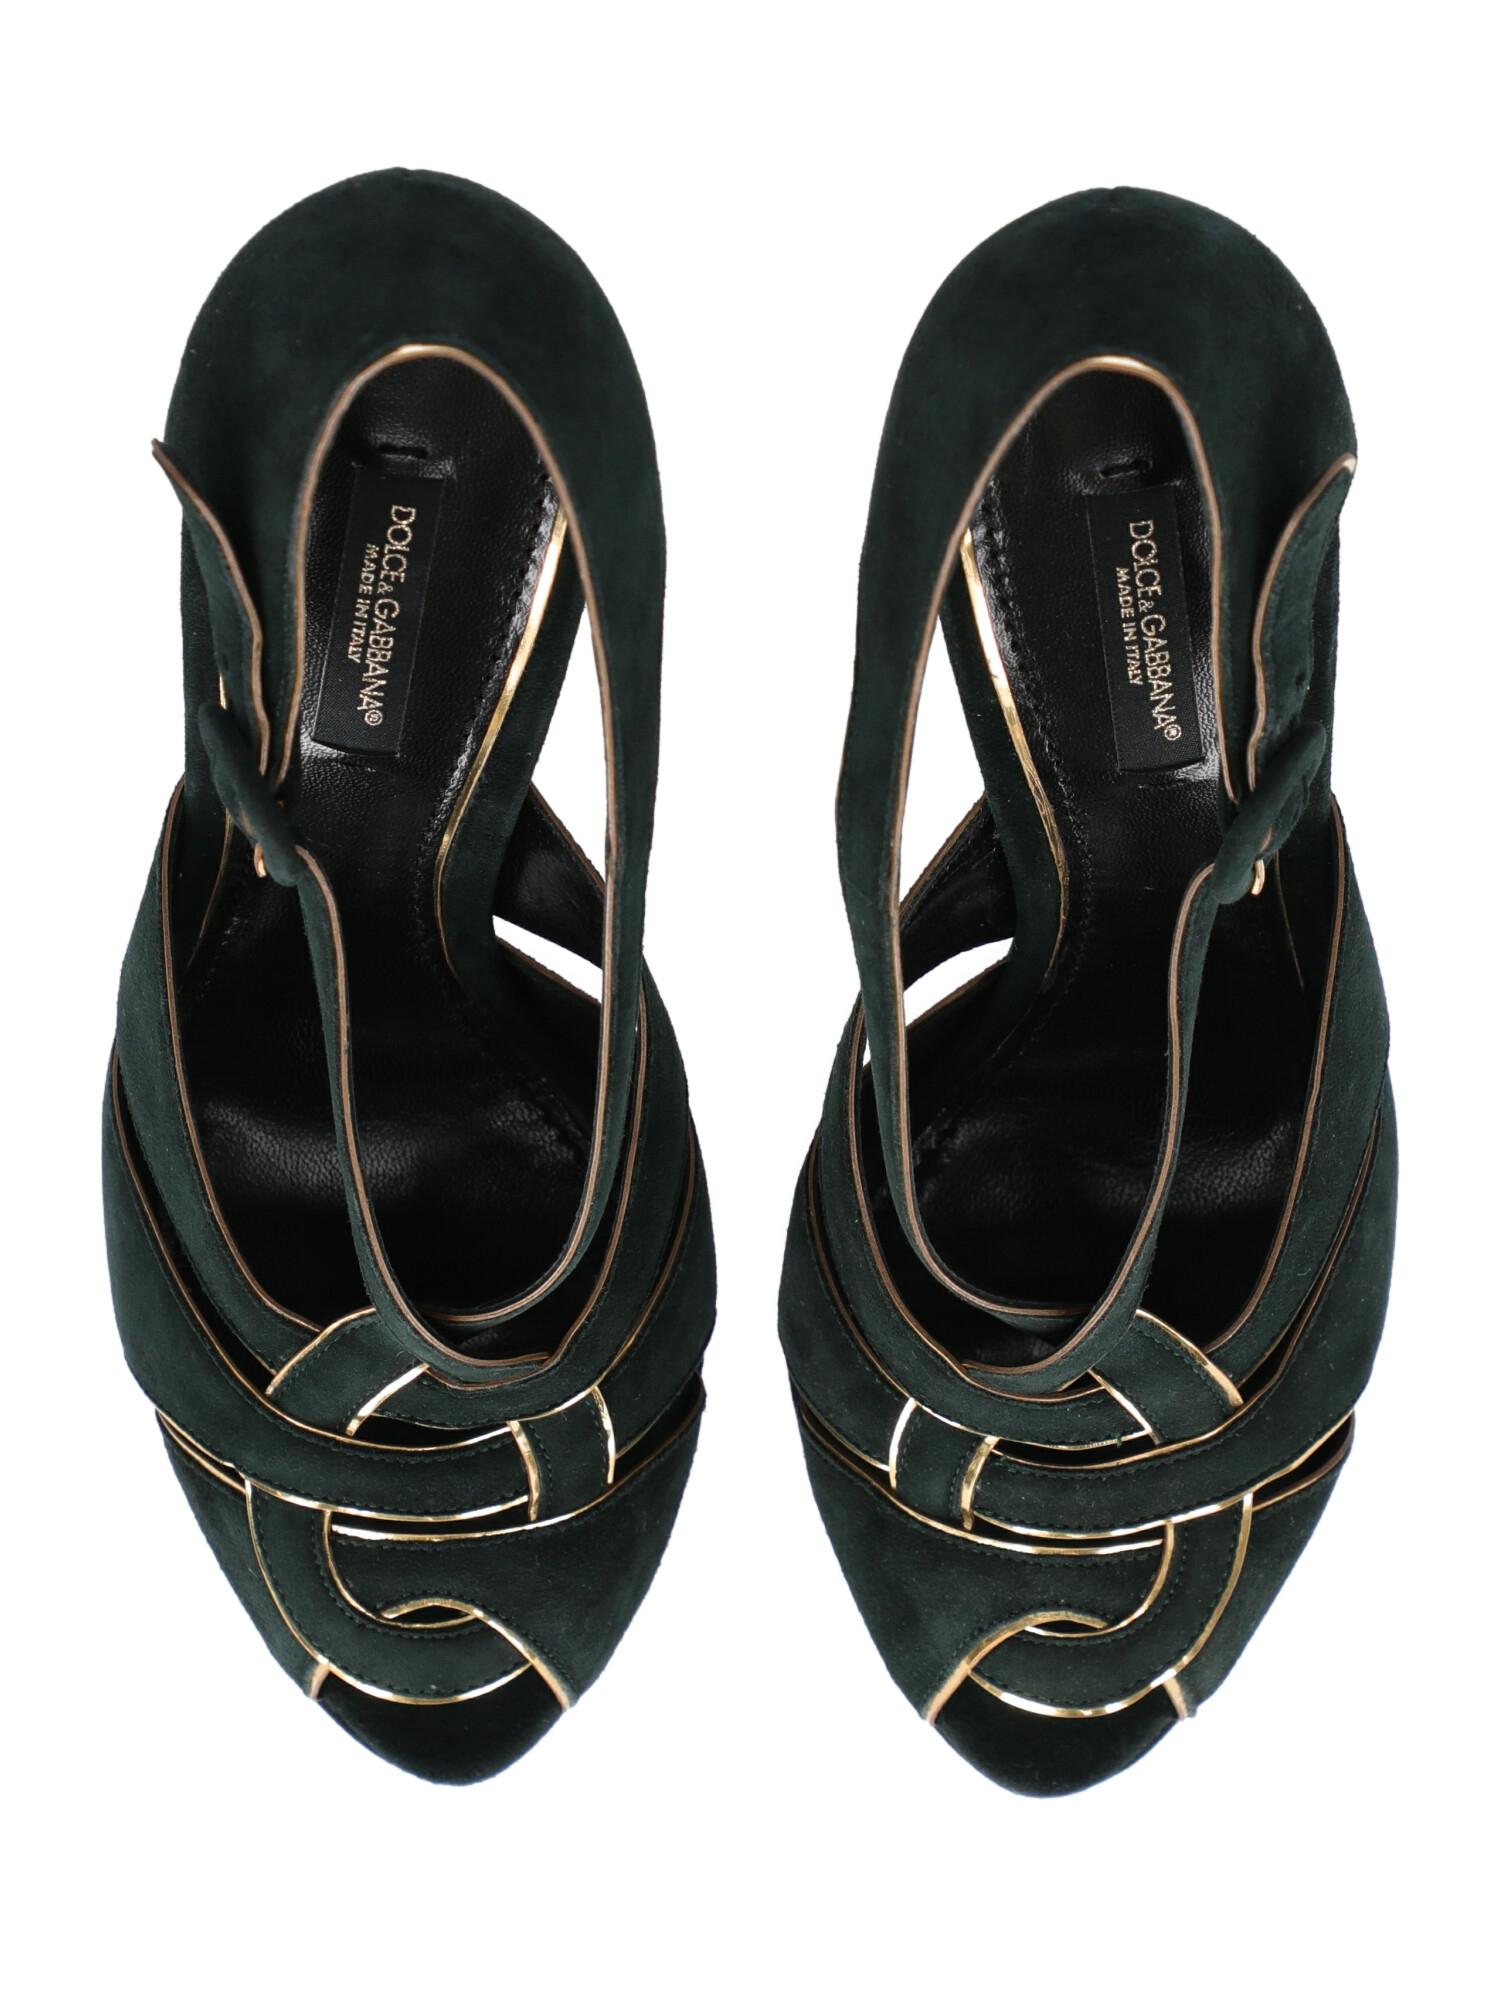 Dolce & Gabbana Woman Sandals Green Leather IT 38 For Sale 1